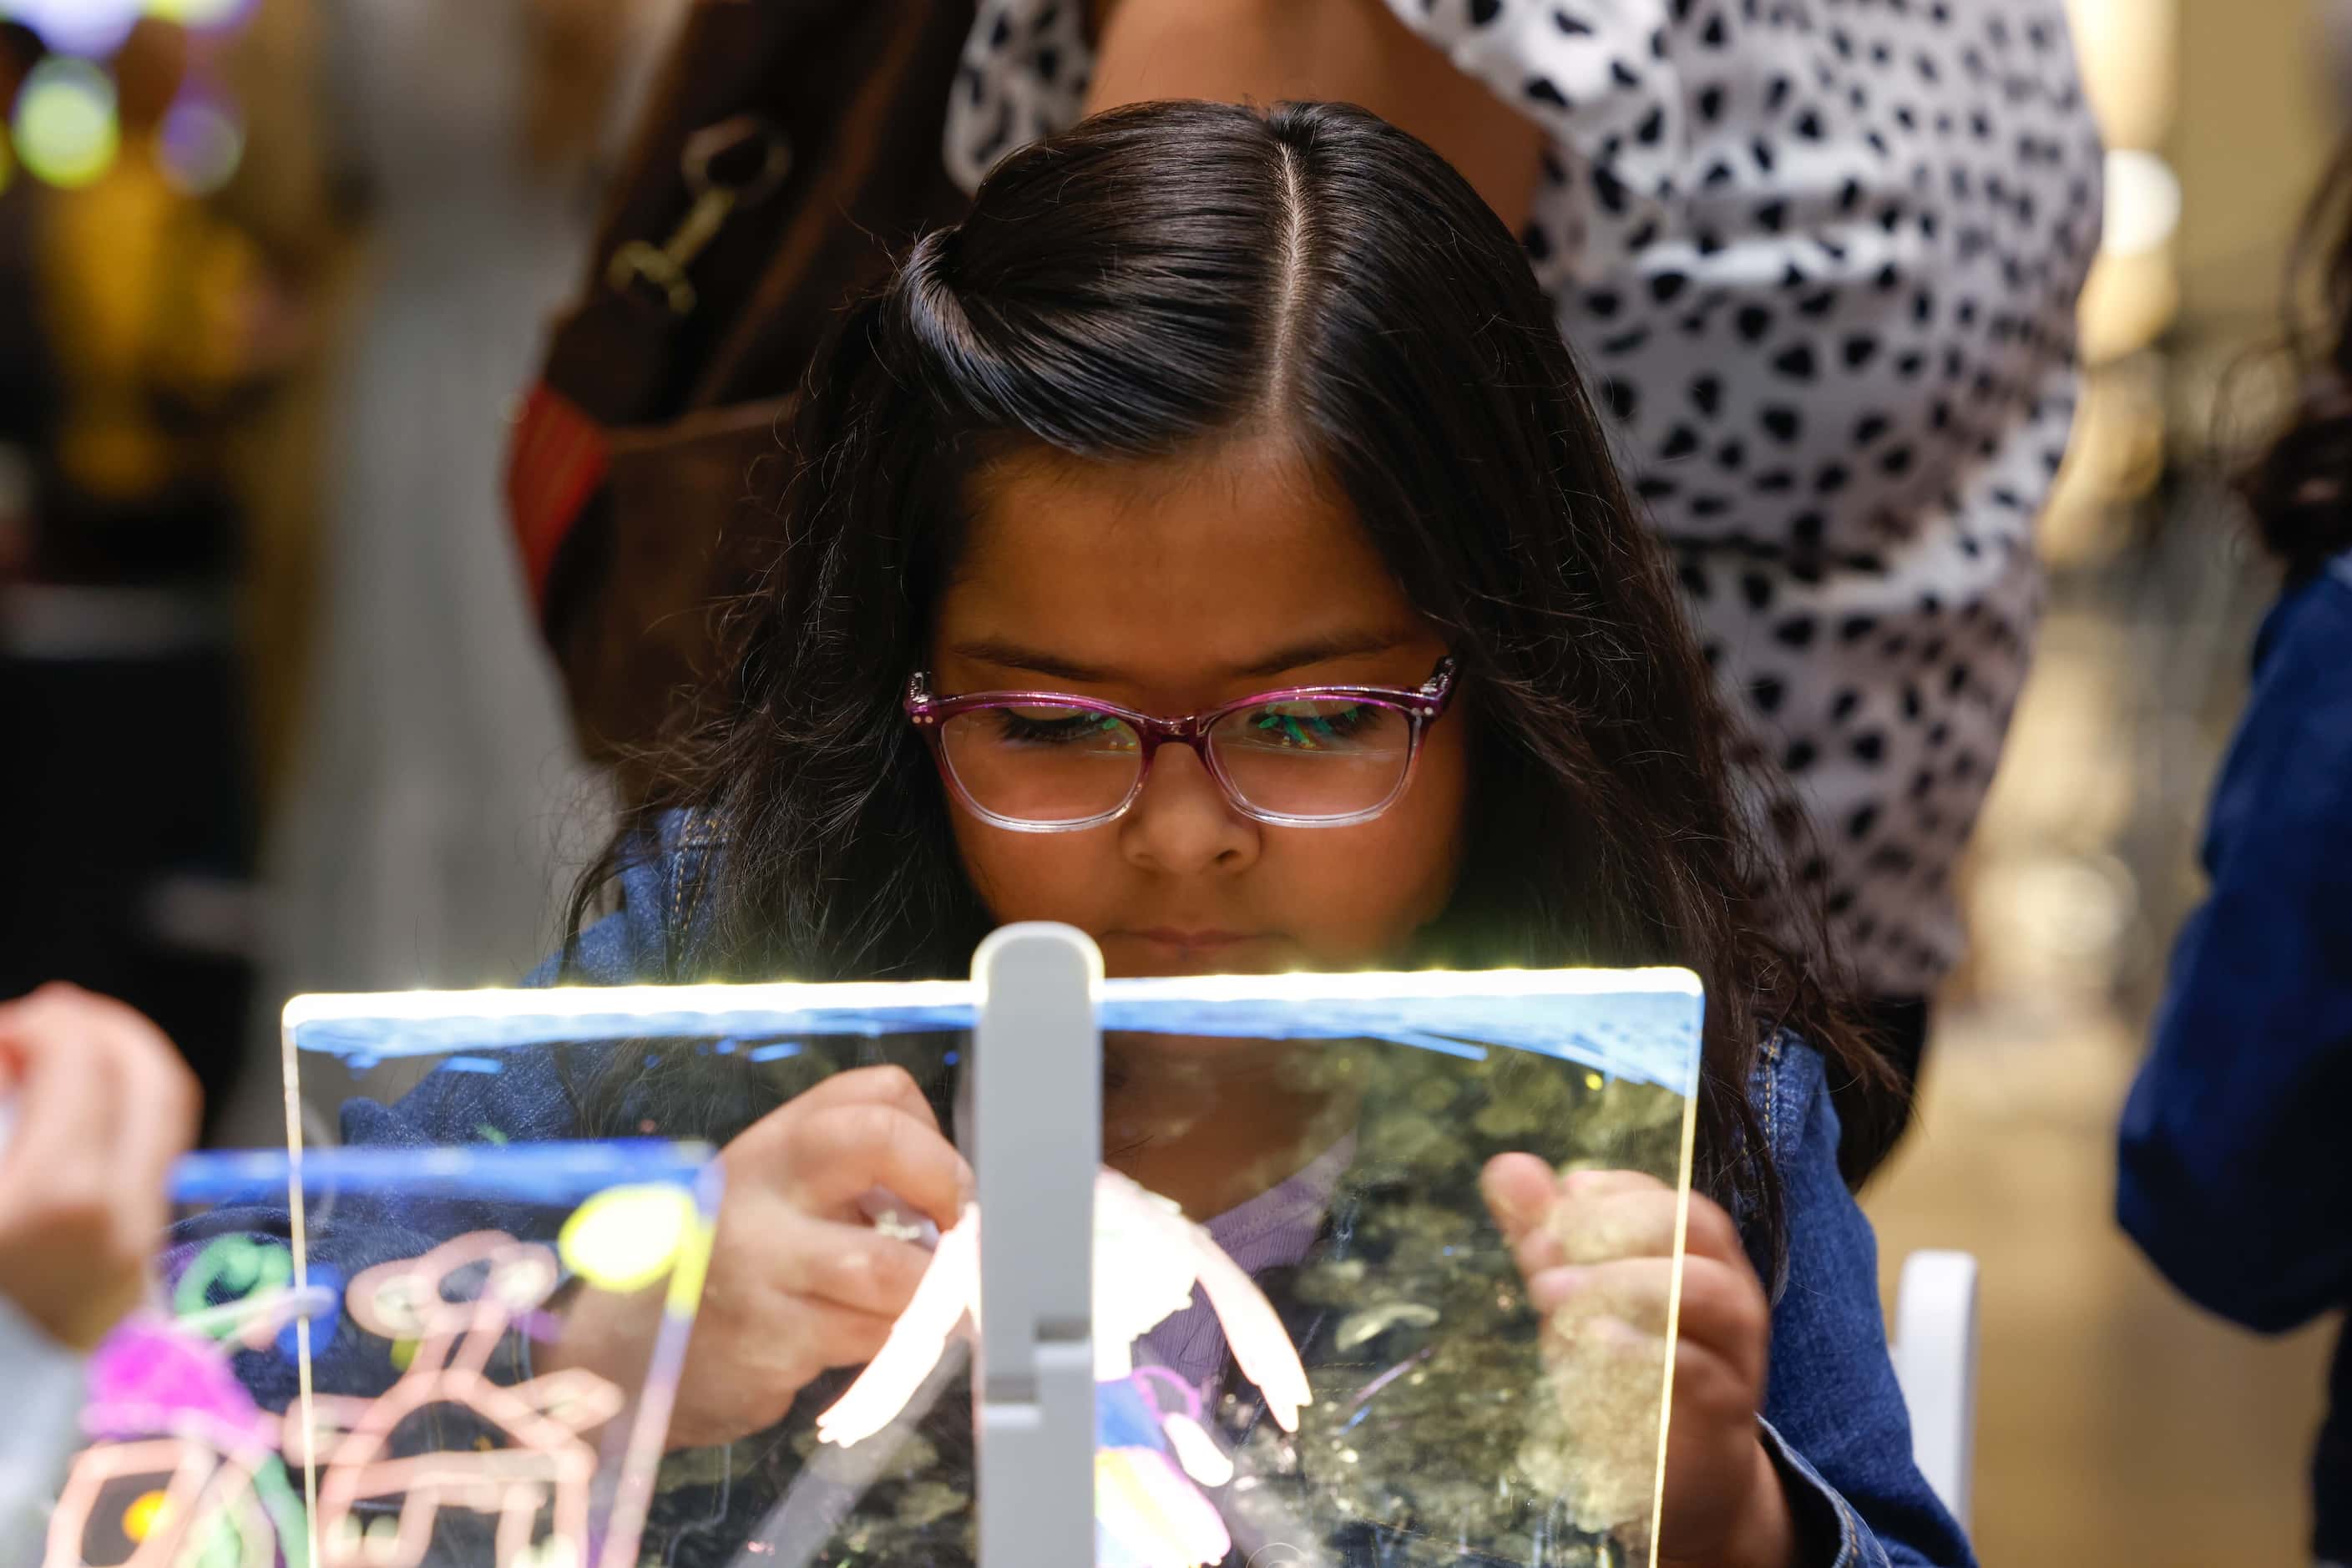 Evie Rojas, 6, participates in an activity at the NorthPark mall in Dallas on Thursday,...